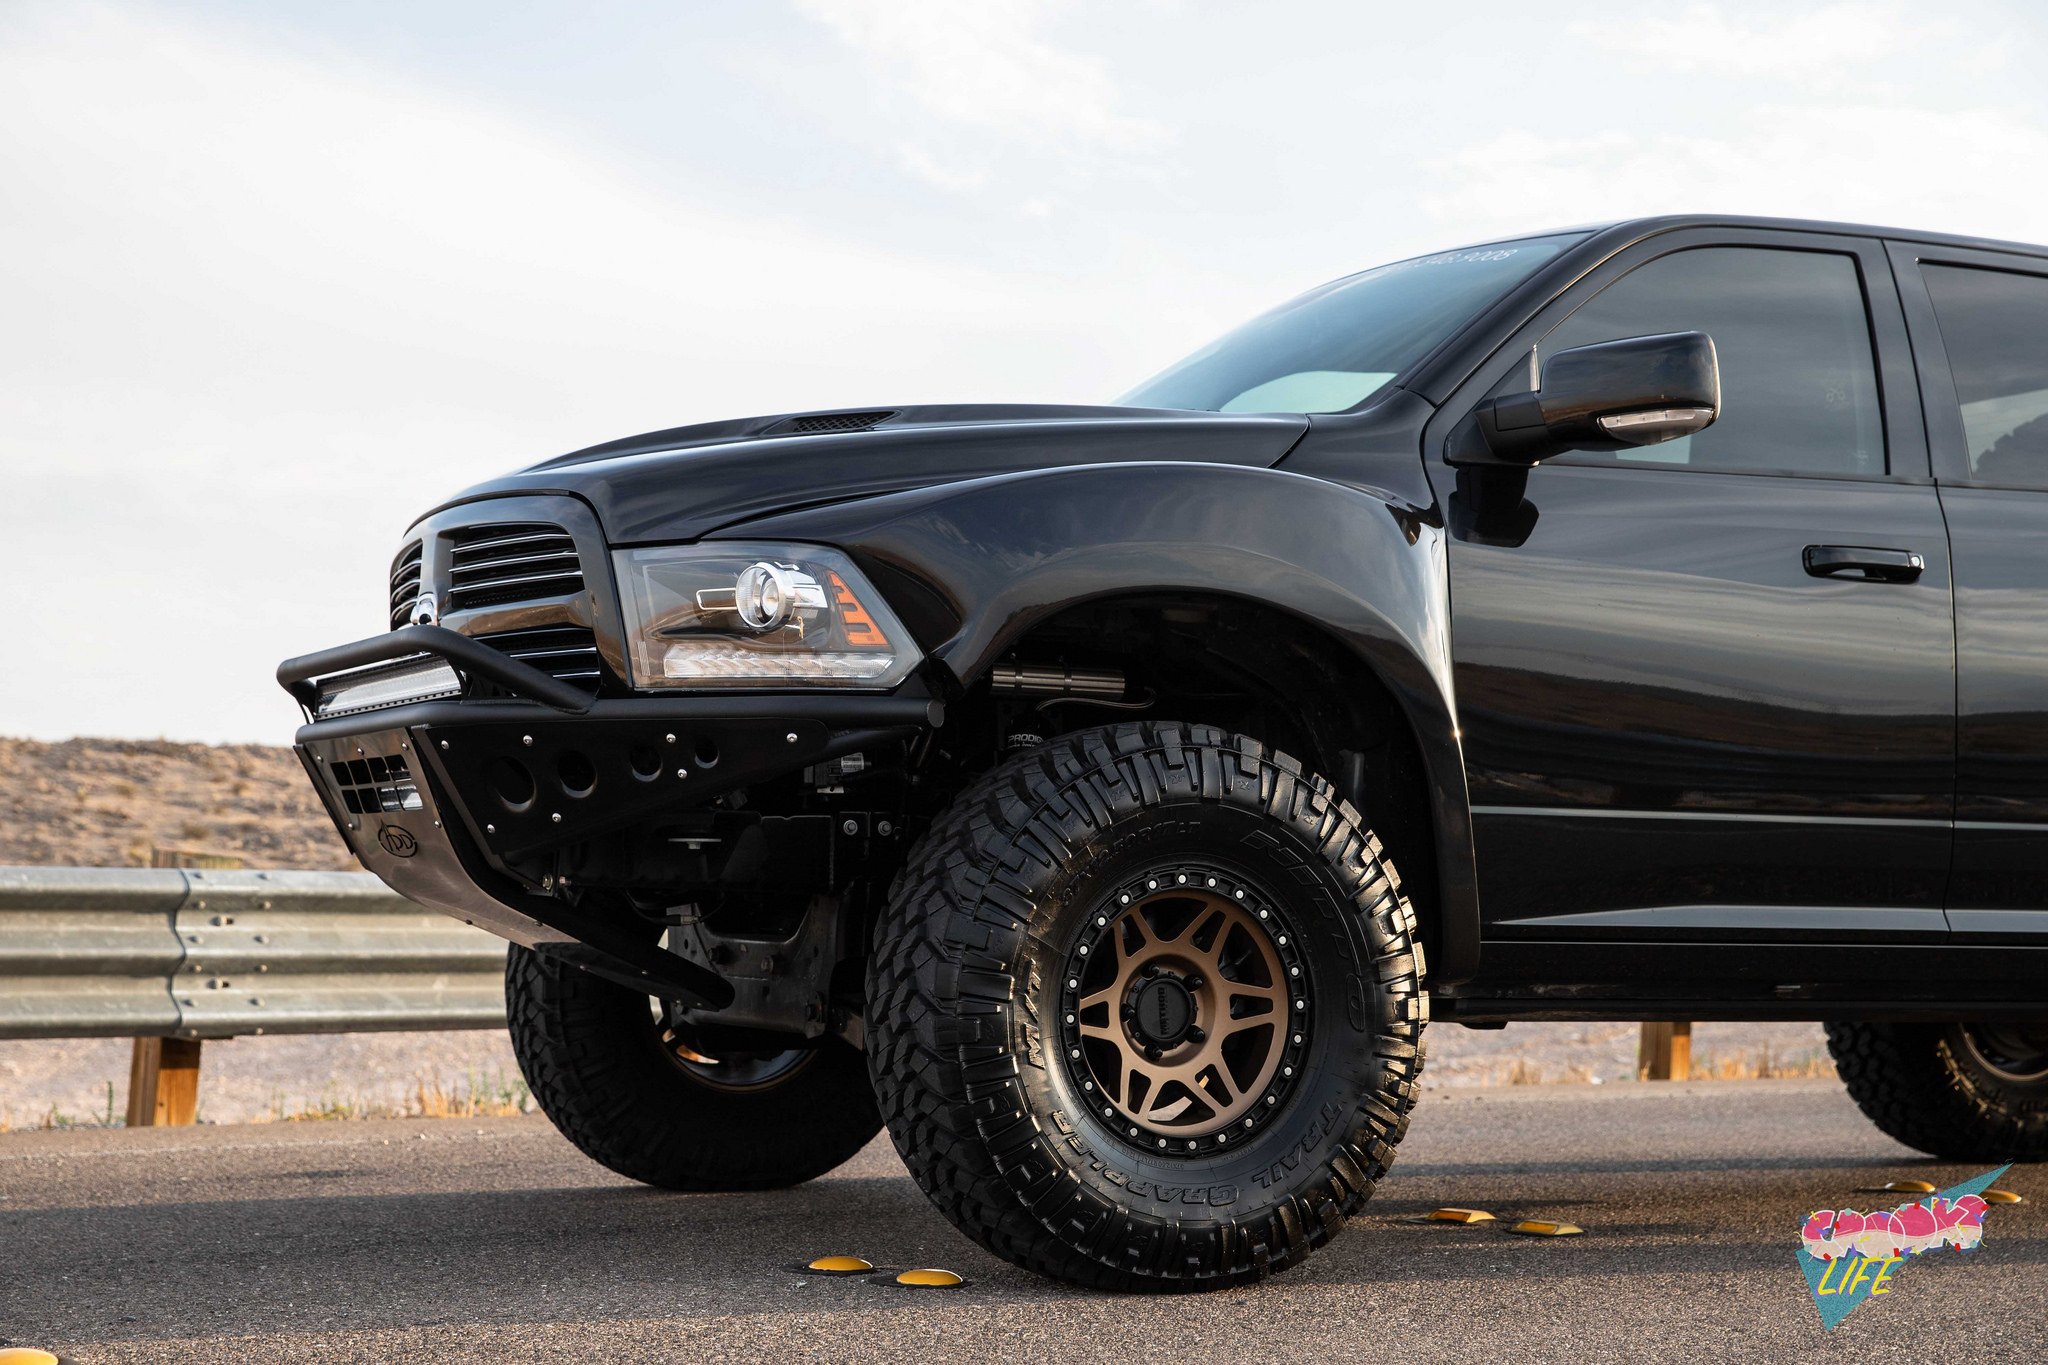 Toyo Tires on Black Dodge Ram - Photo by Jimmy Crook